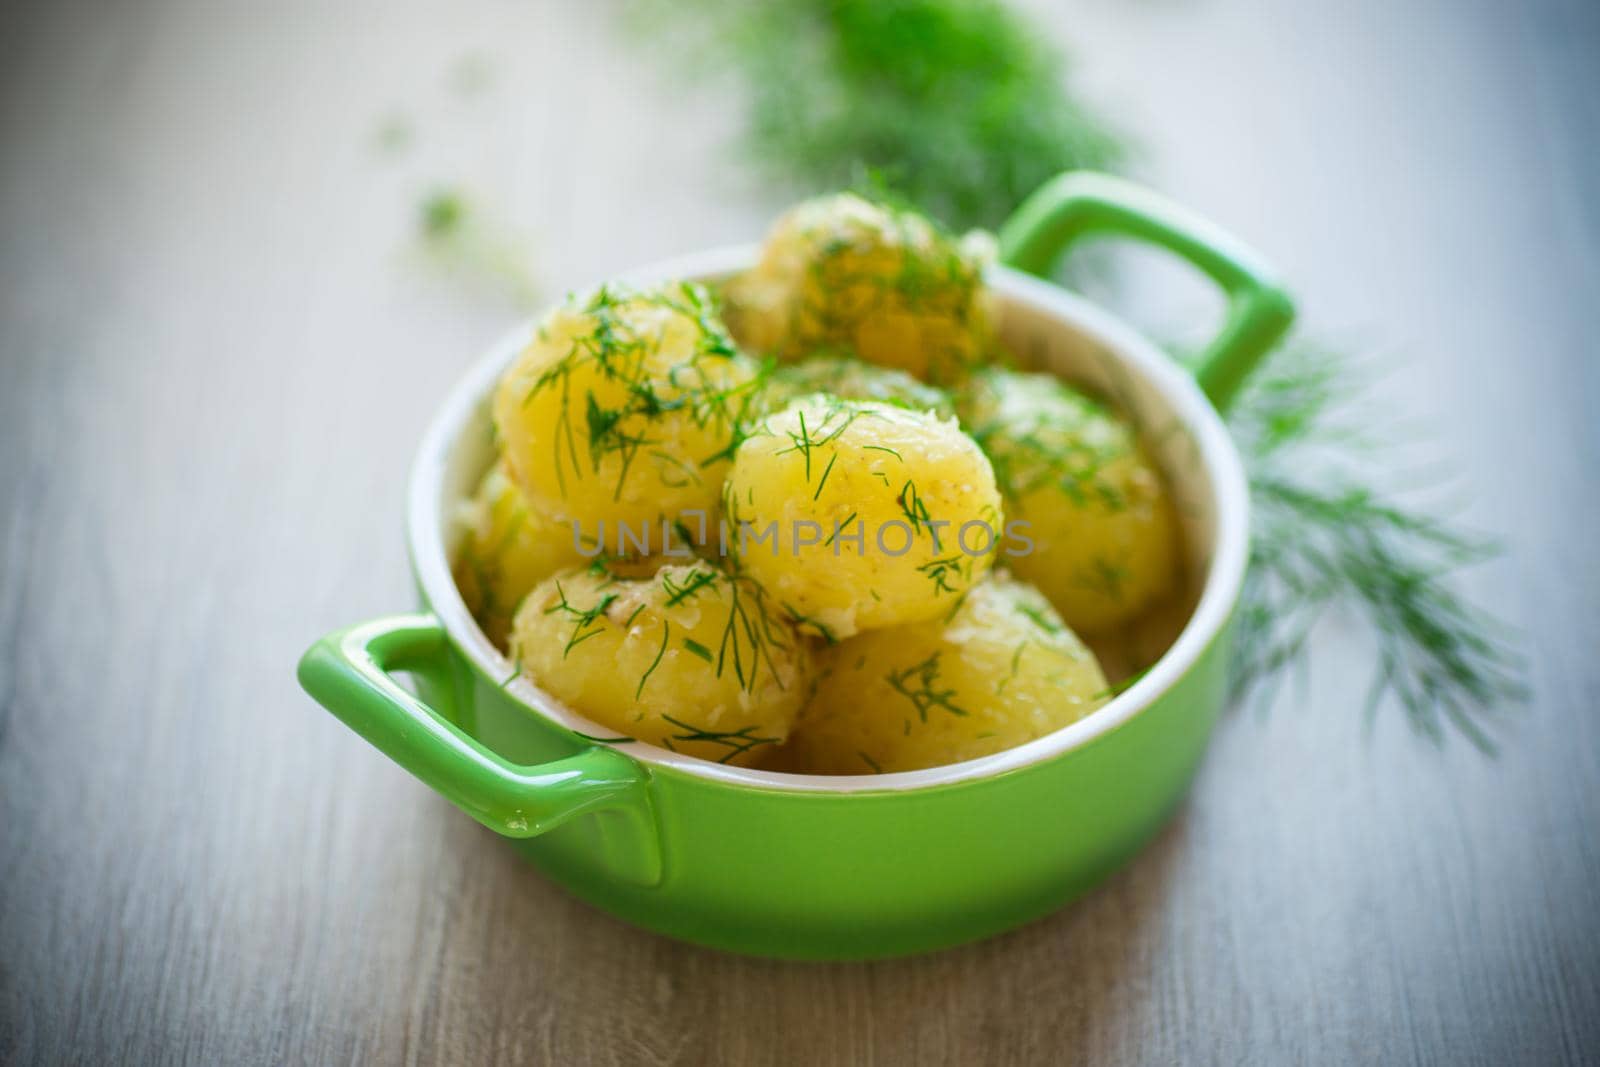 boiled early potatoes with butter and fresh dill in a bowl on a wooden table